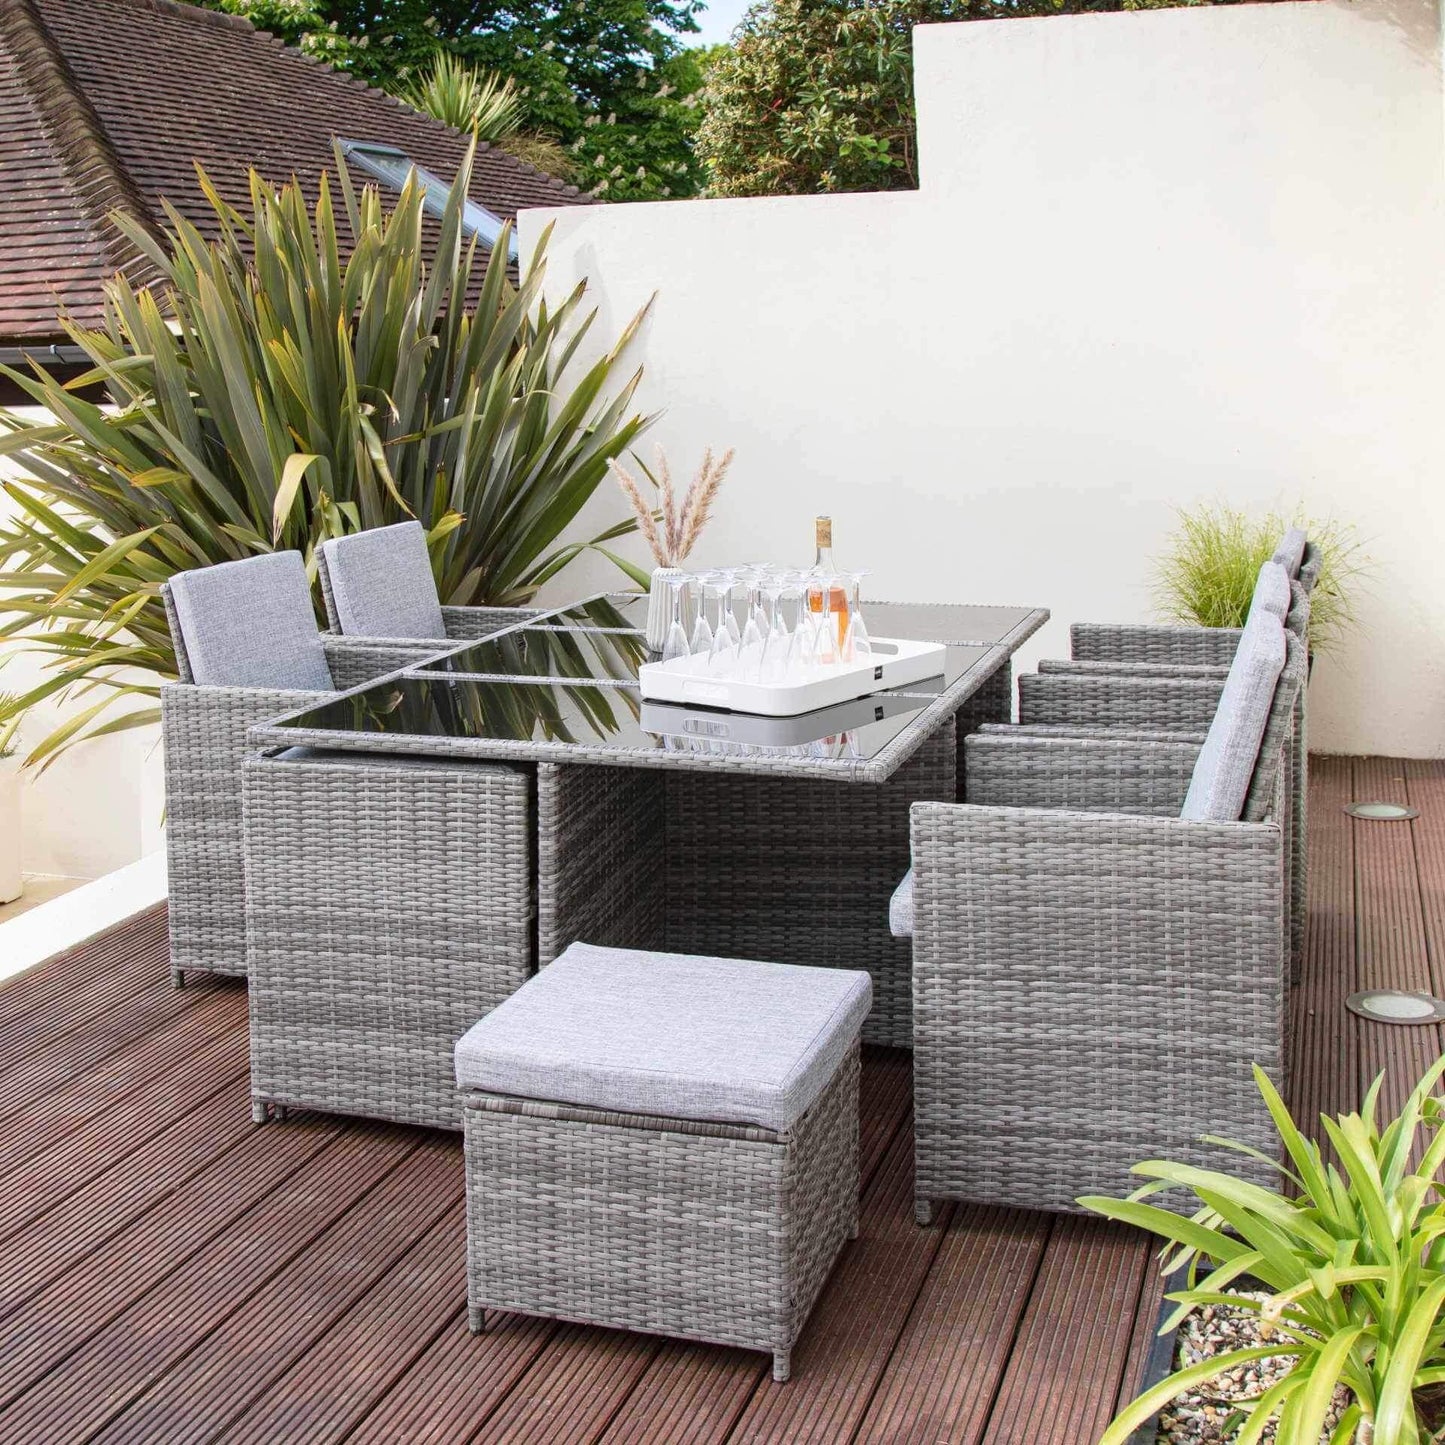 10 Seat Rattan Cube Outdoor Dining Set with Premium Parasol and Parasol Rain Cover - Grey Weave - Laura James